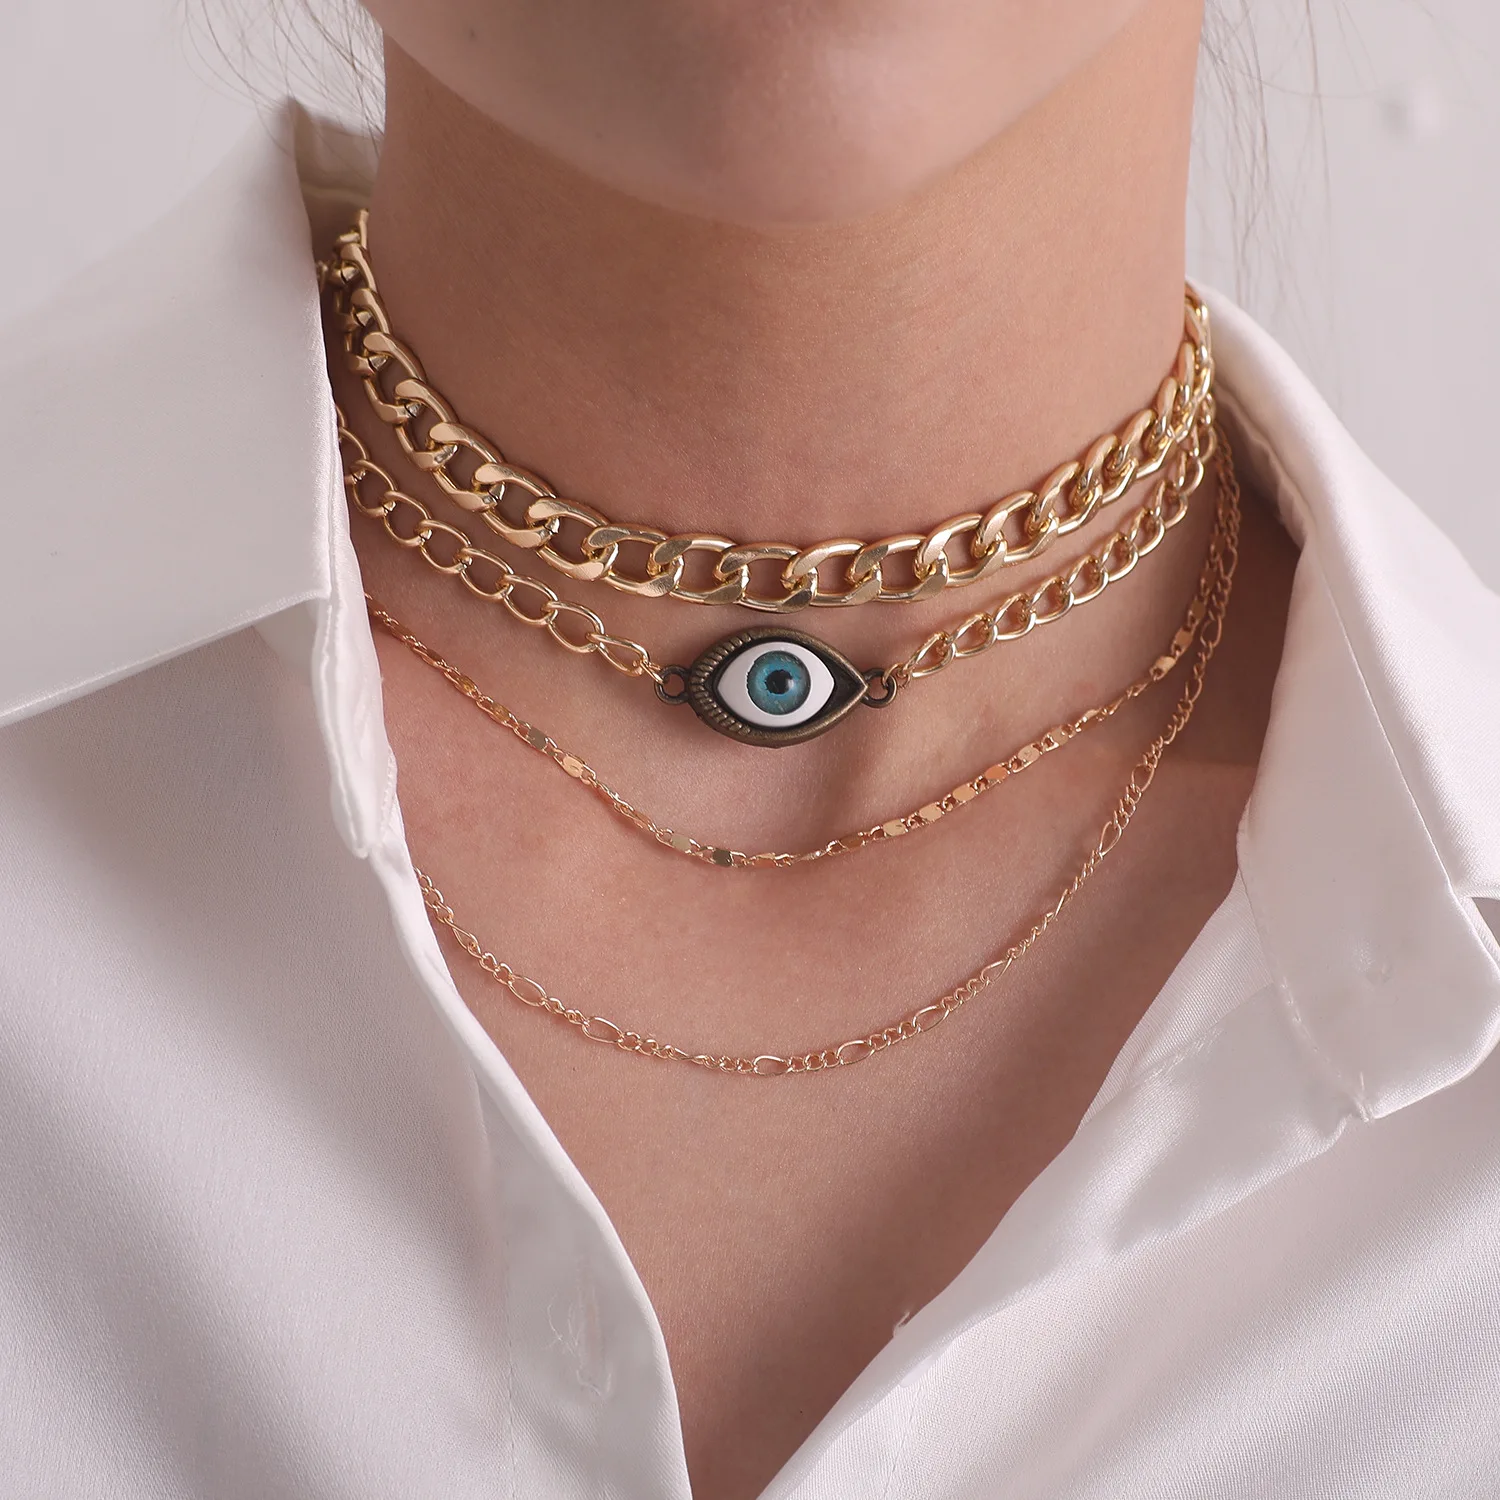 

Statement Multi Layer Link Chain Evils Eyes Charm Necklace Personalized Gold Plating Skeleton Cuban Chain Necklace, As picture show